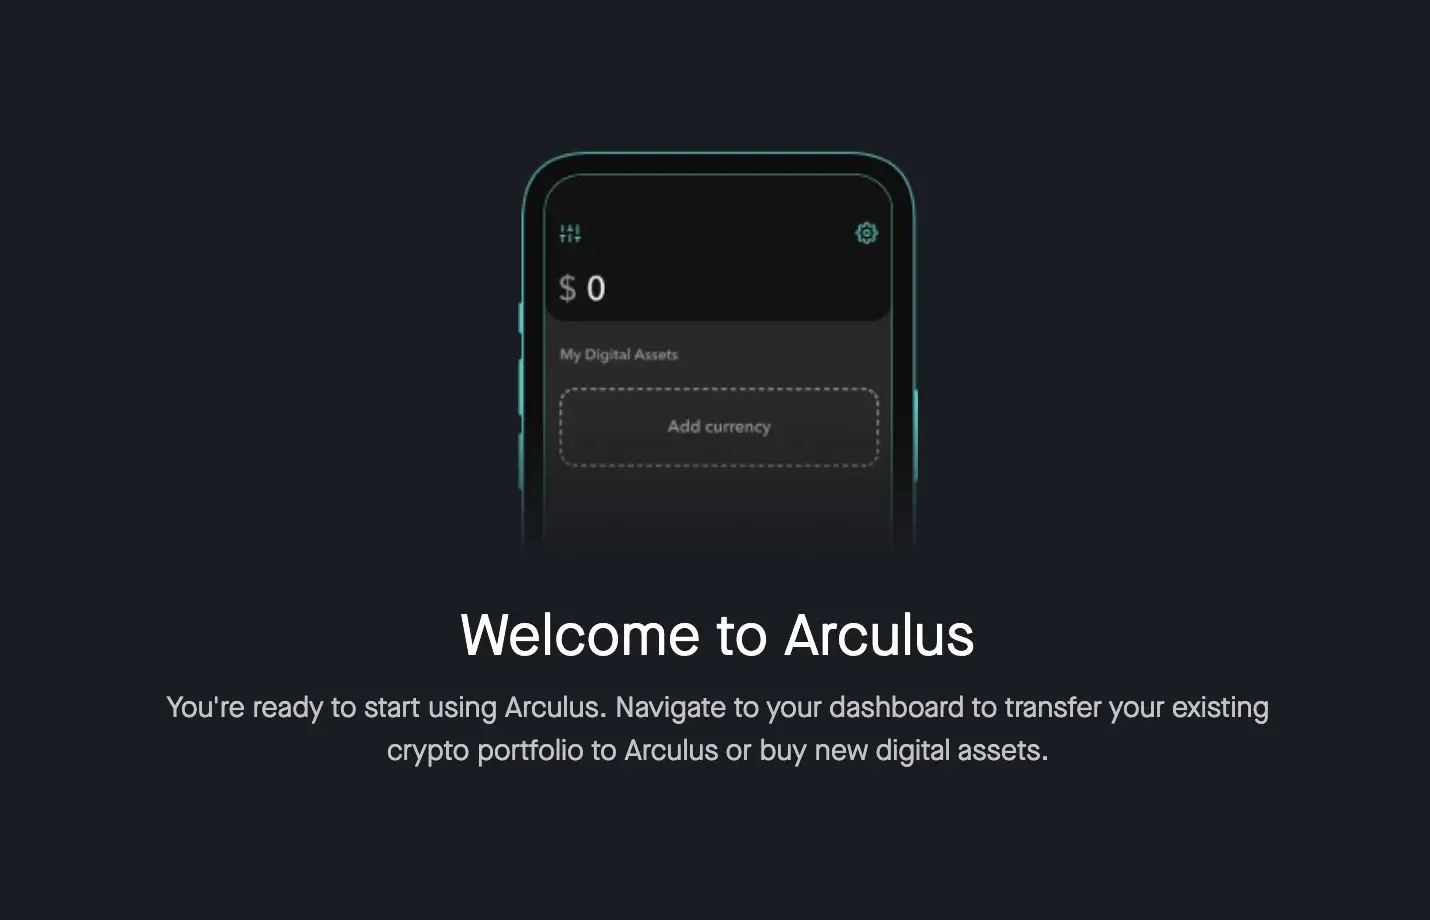 Step 6: Start your crypto activity on the Arculus Wallet App